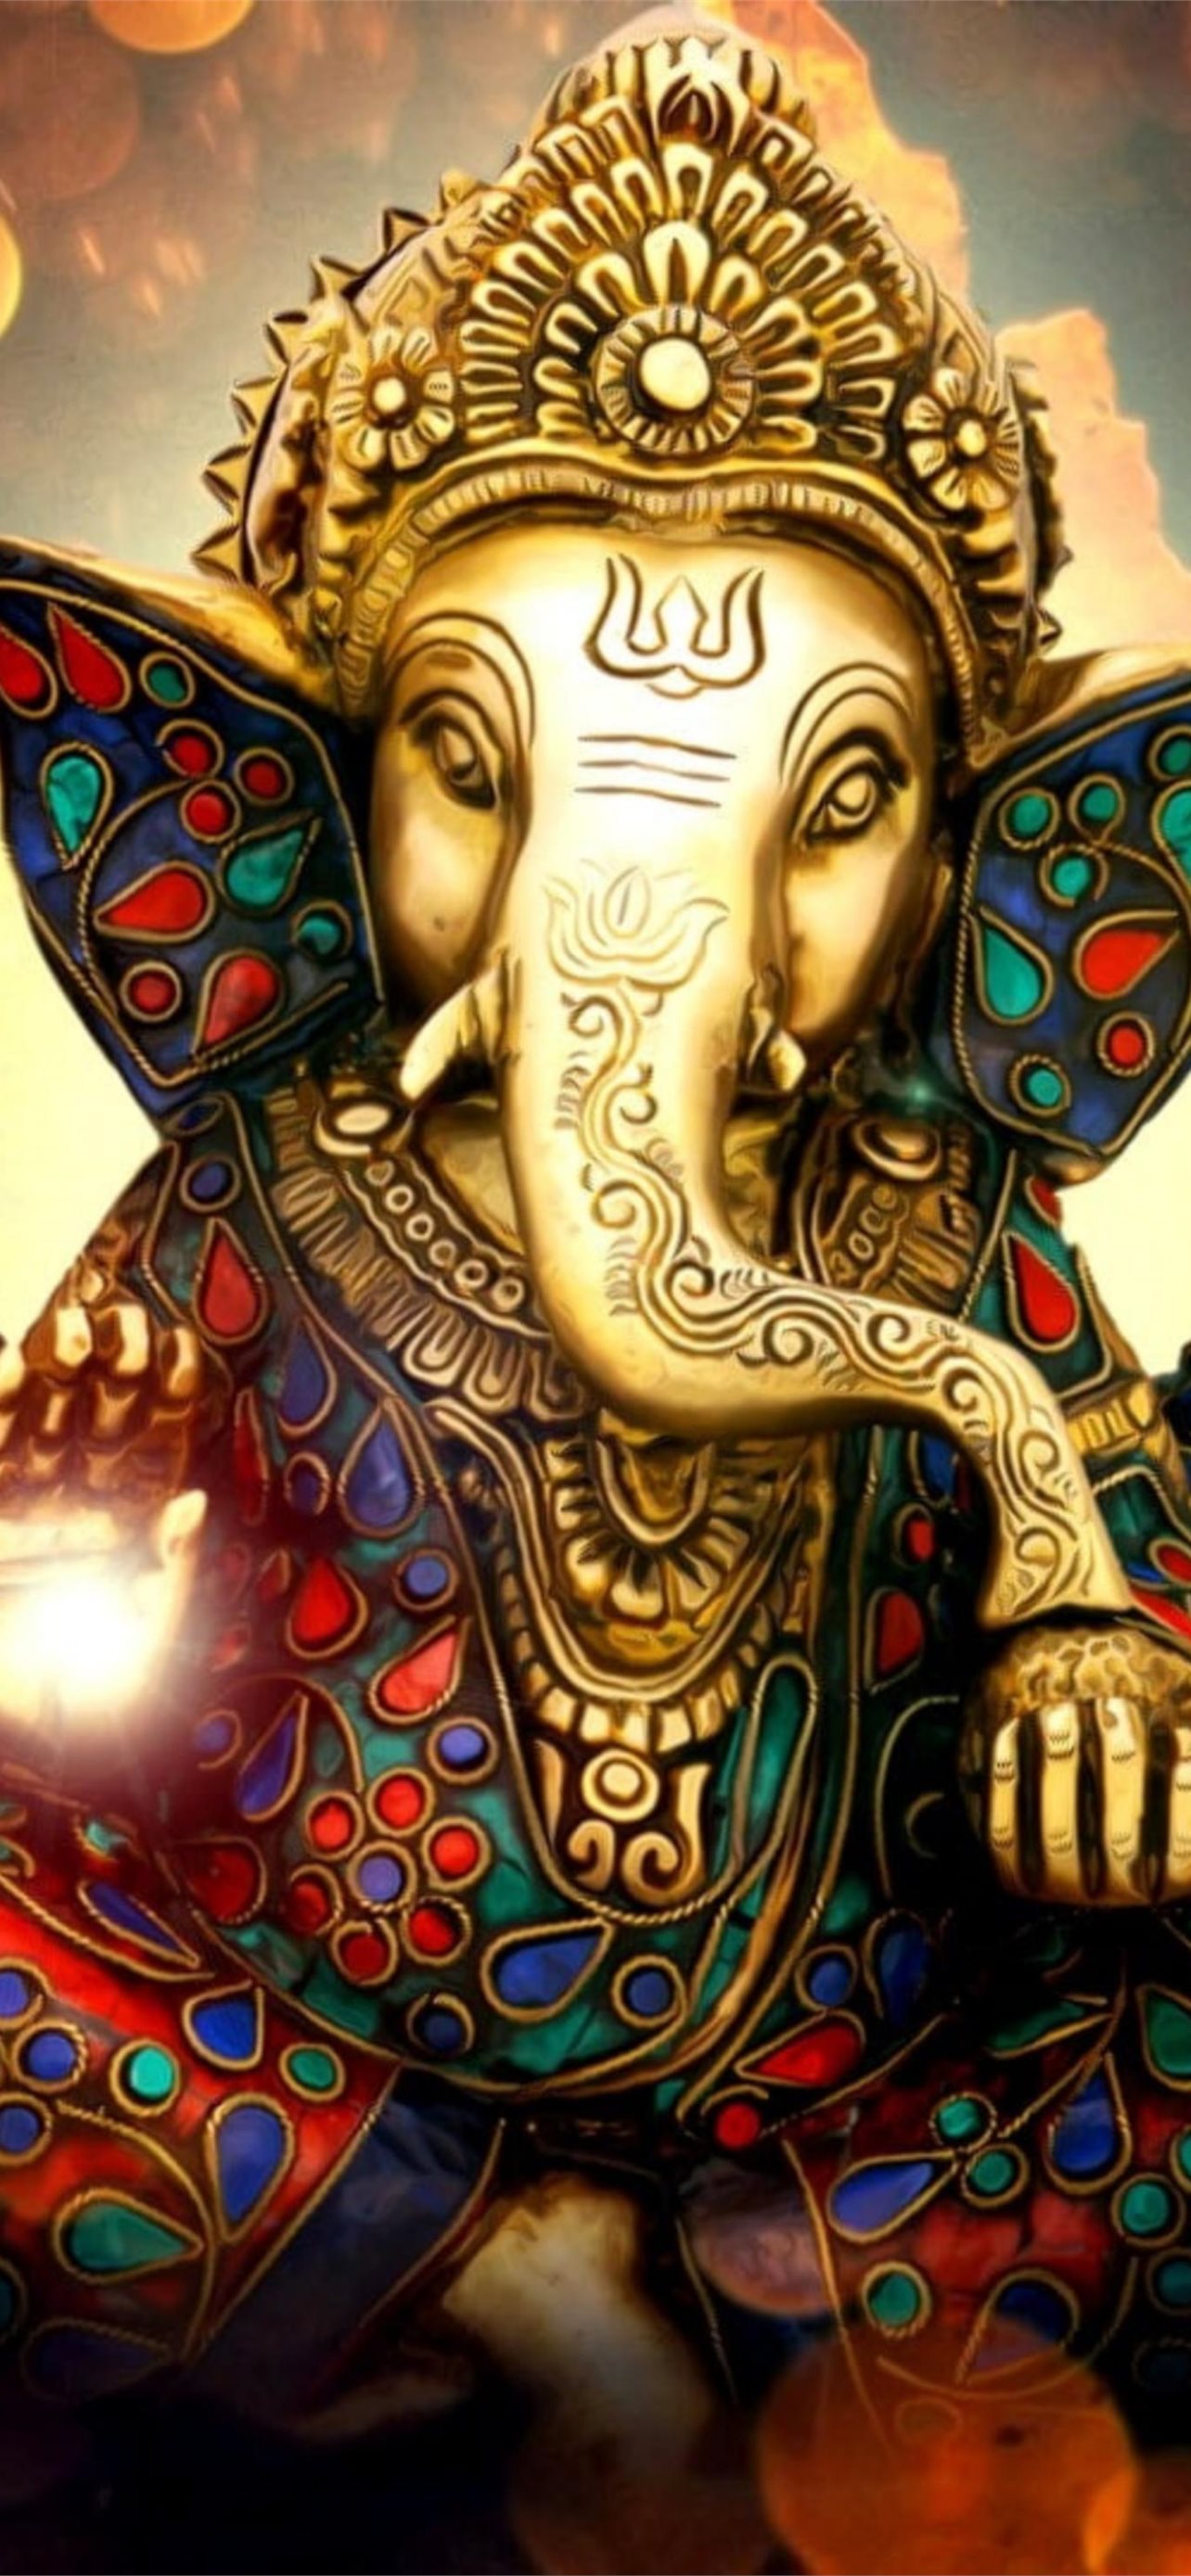 Amoled Hindu God Cave iPhone Wallpapers Free Download